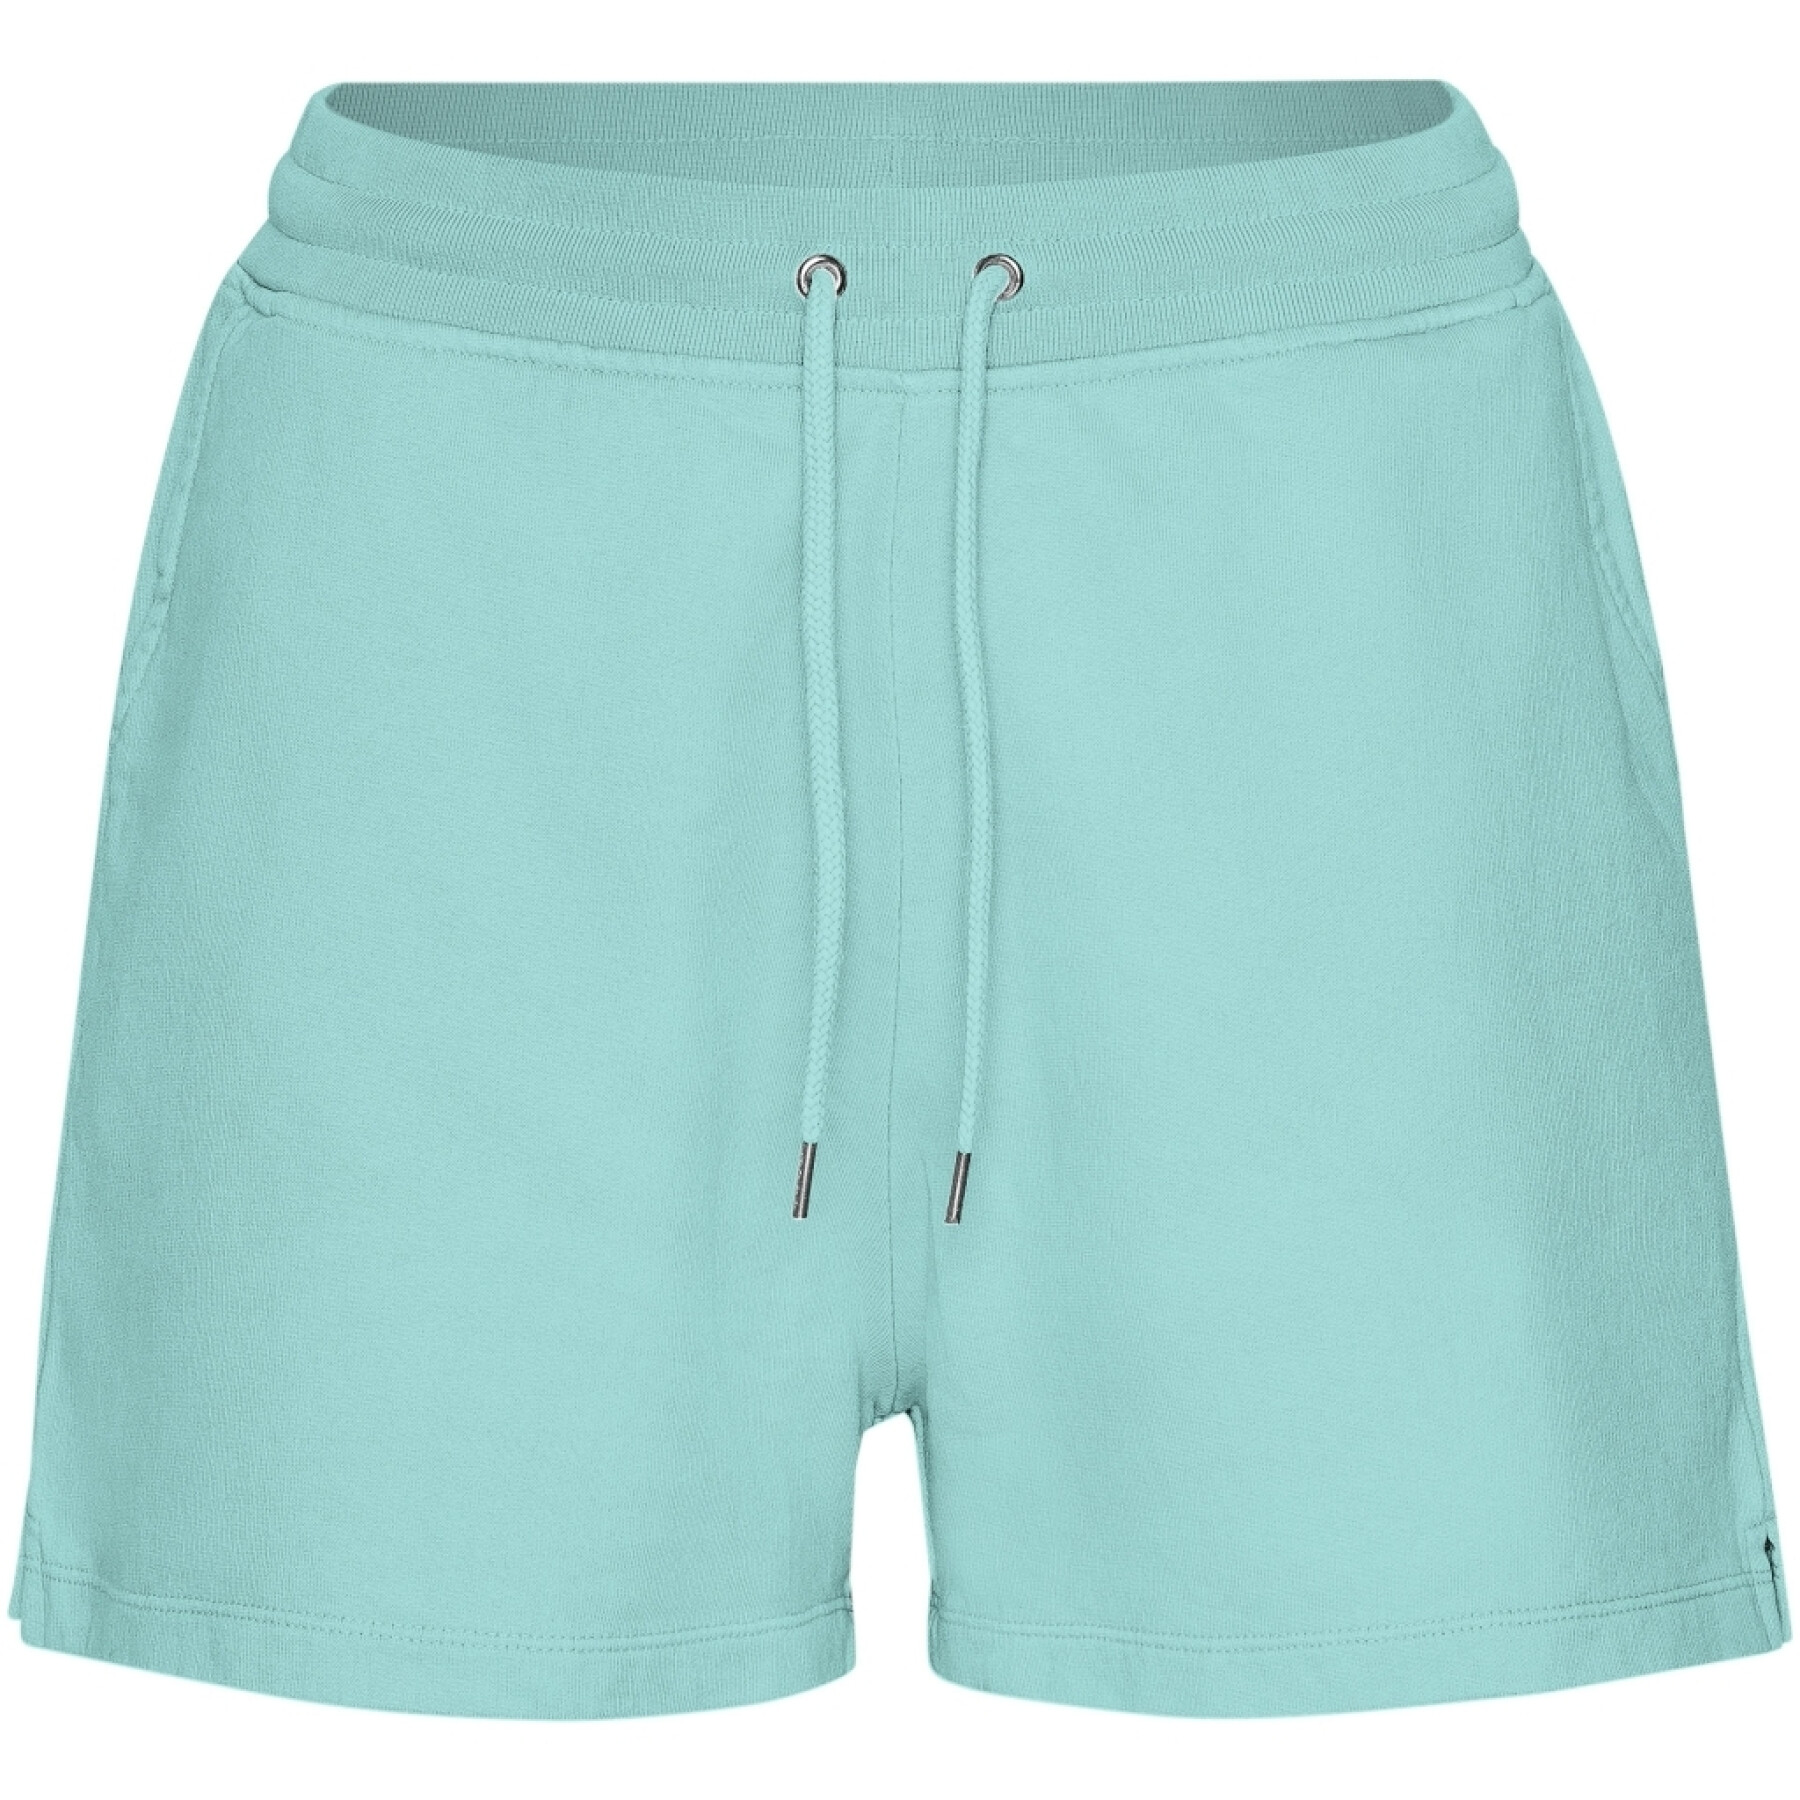 Women's shorts Colorful Standard Organic Teal Blue